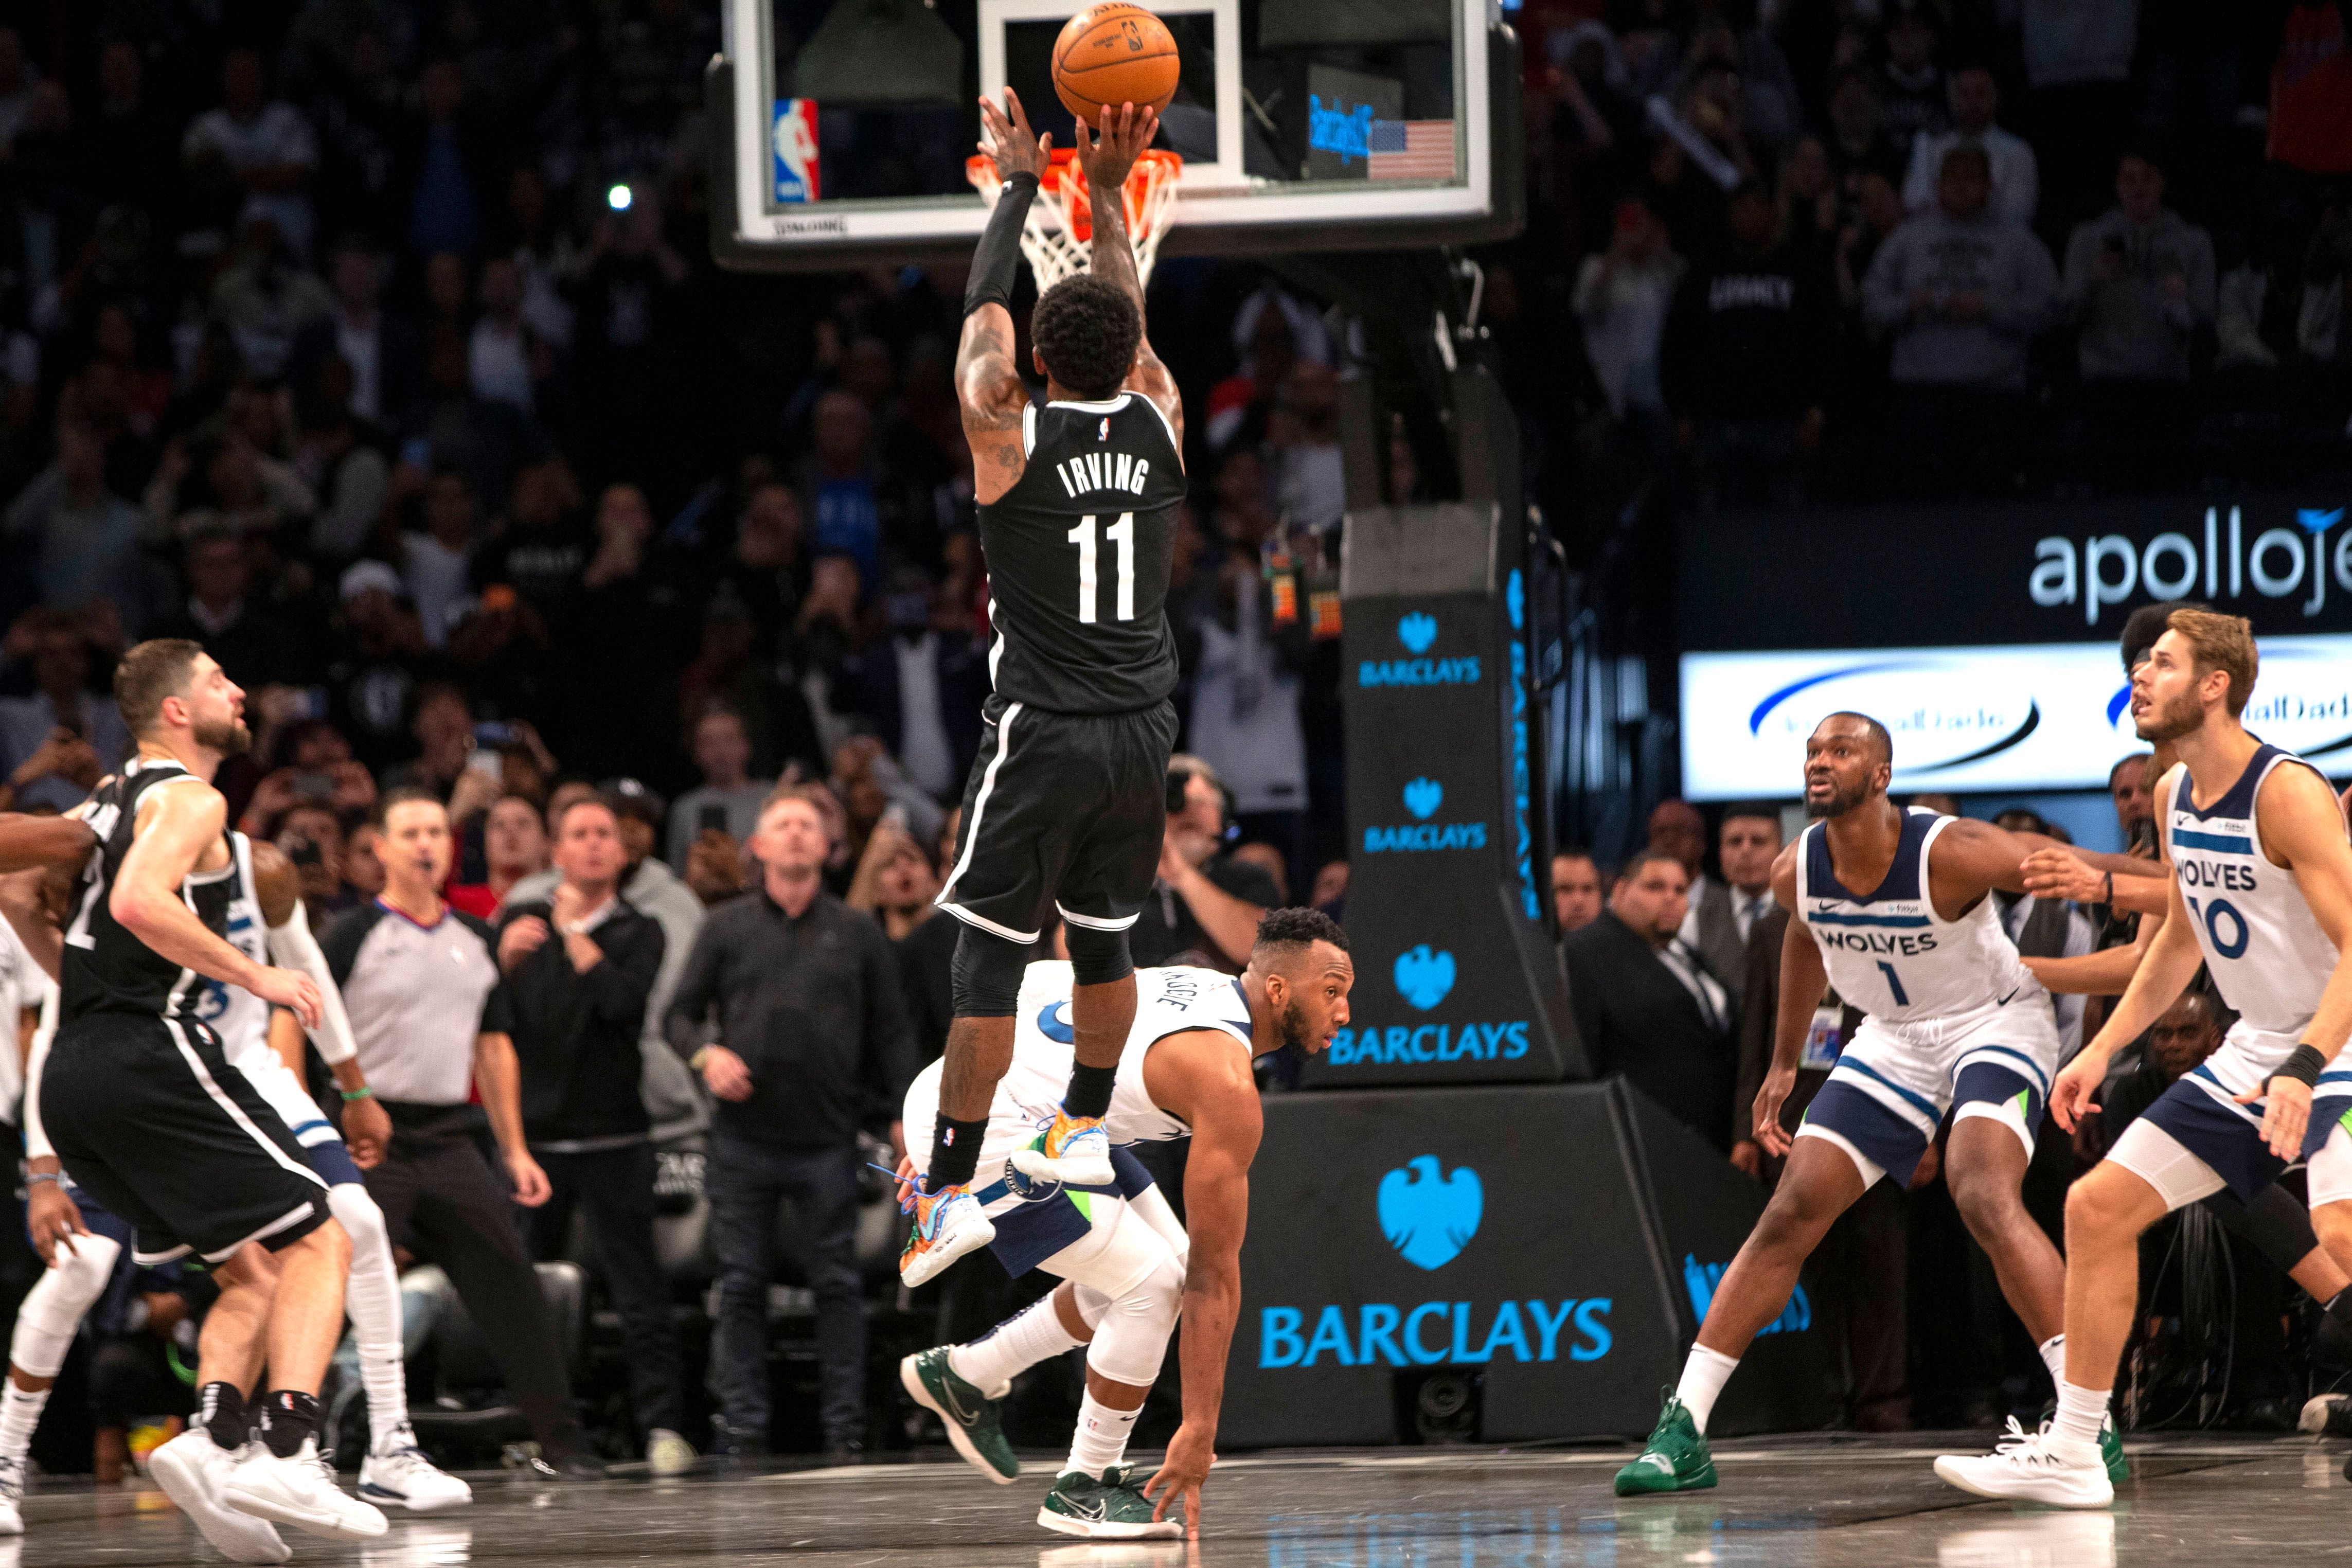 Despite Kyrie's 50 points, Nets lose to Timberwolves in OT, 127-126